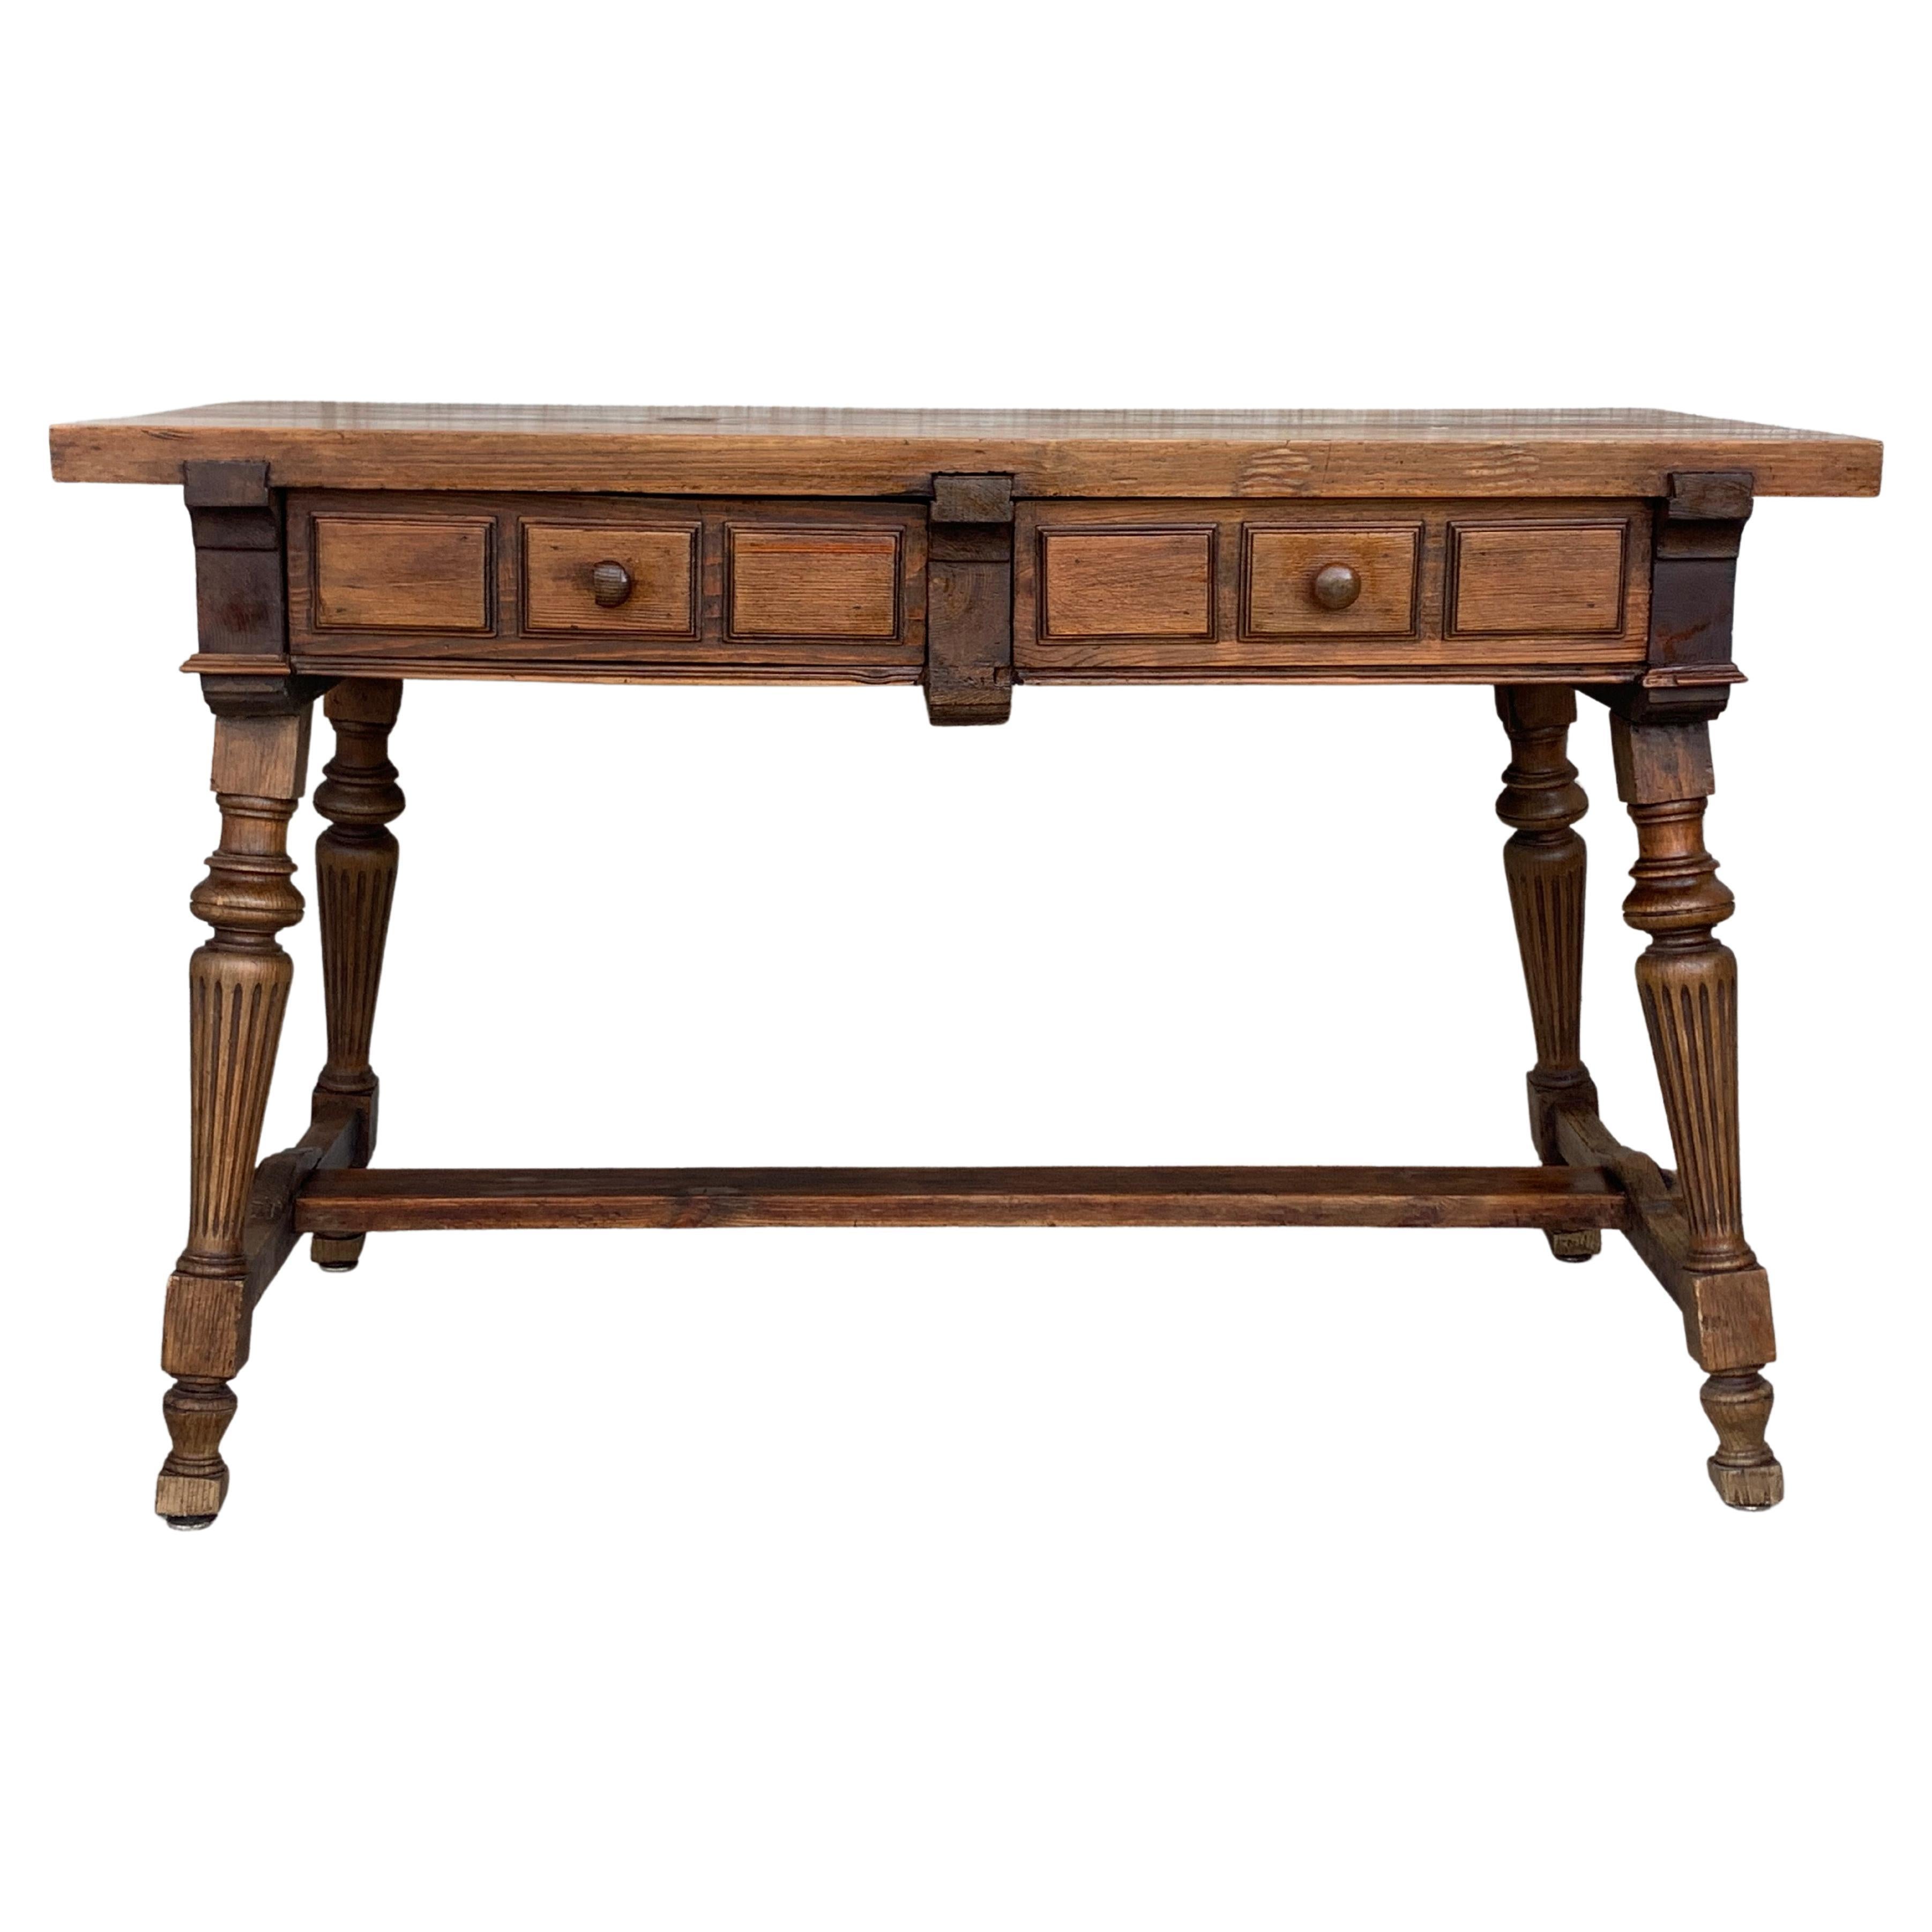 19th Century Solid Oak Baroque Fluted Legs Desk Writing Table or Console For Sale